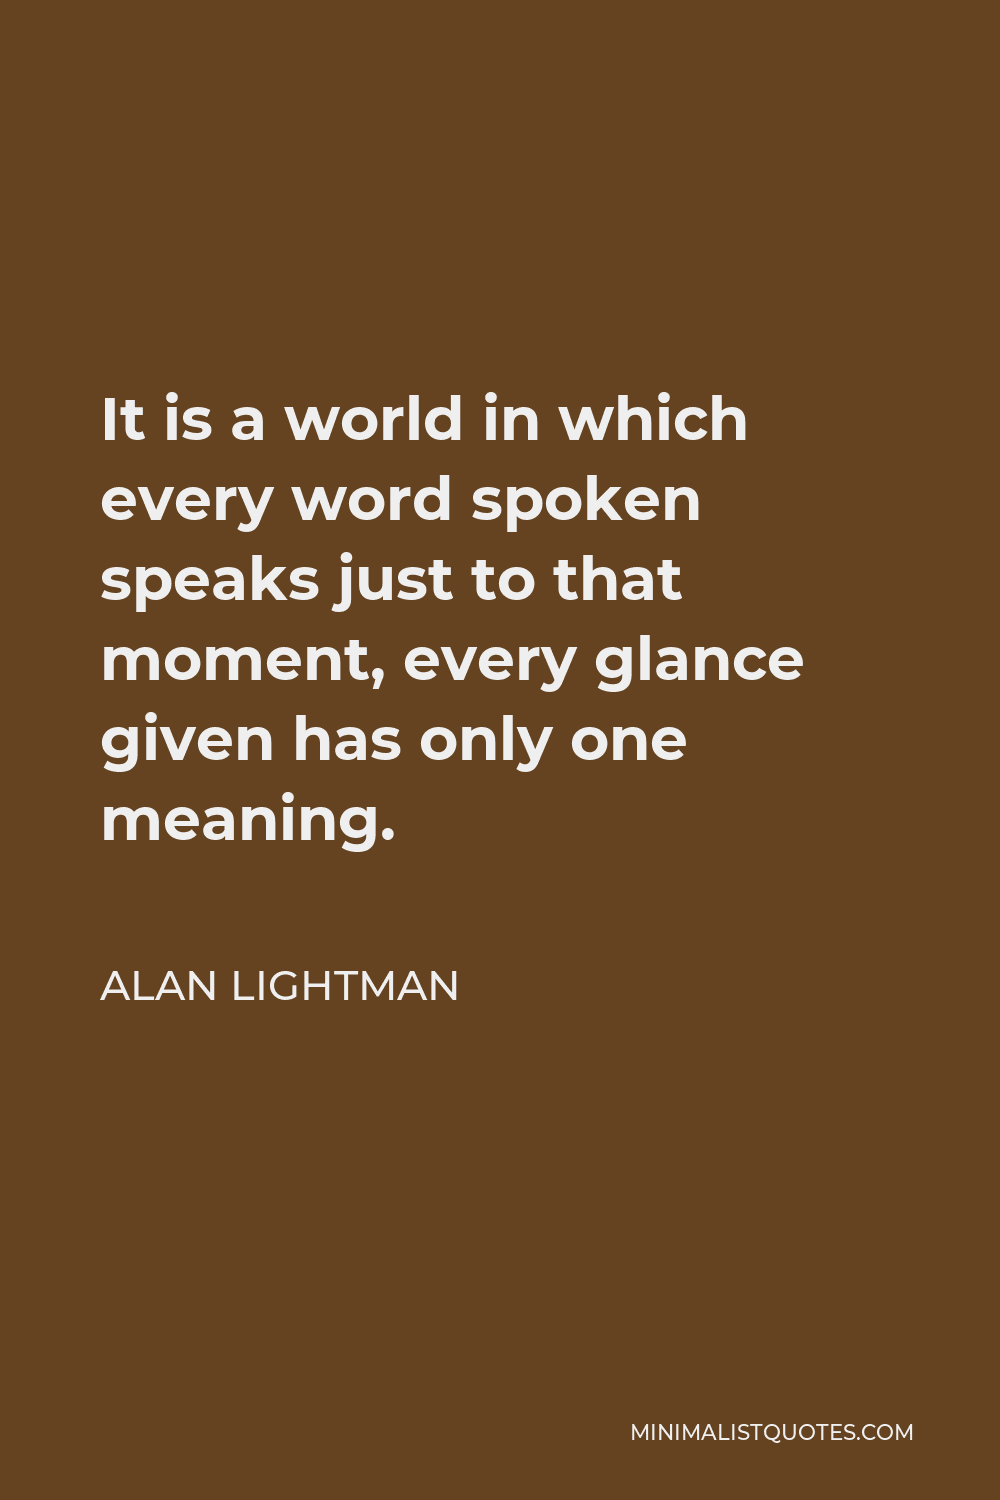 Alan Lightman Quote - It is a world in which every word spoken speaks just to that moment, every glance given has only one meaning, each touch has no past or no future, each kiss is a kiss of immediacy.